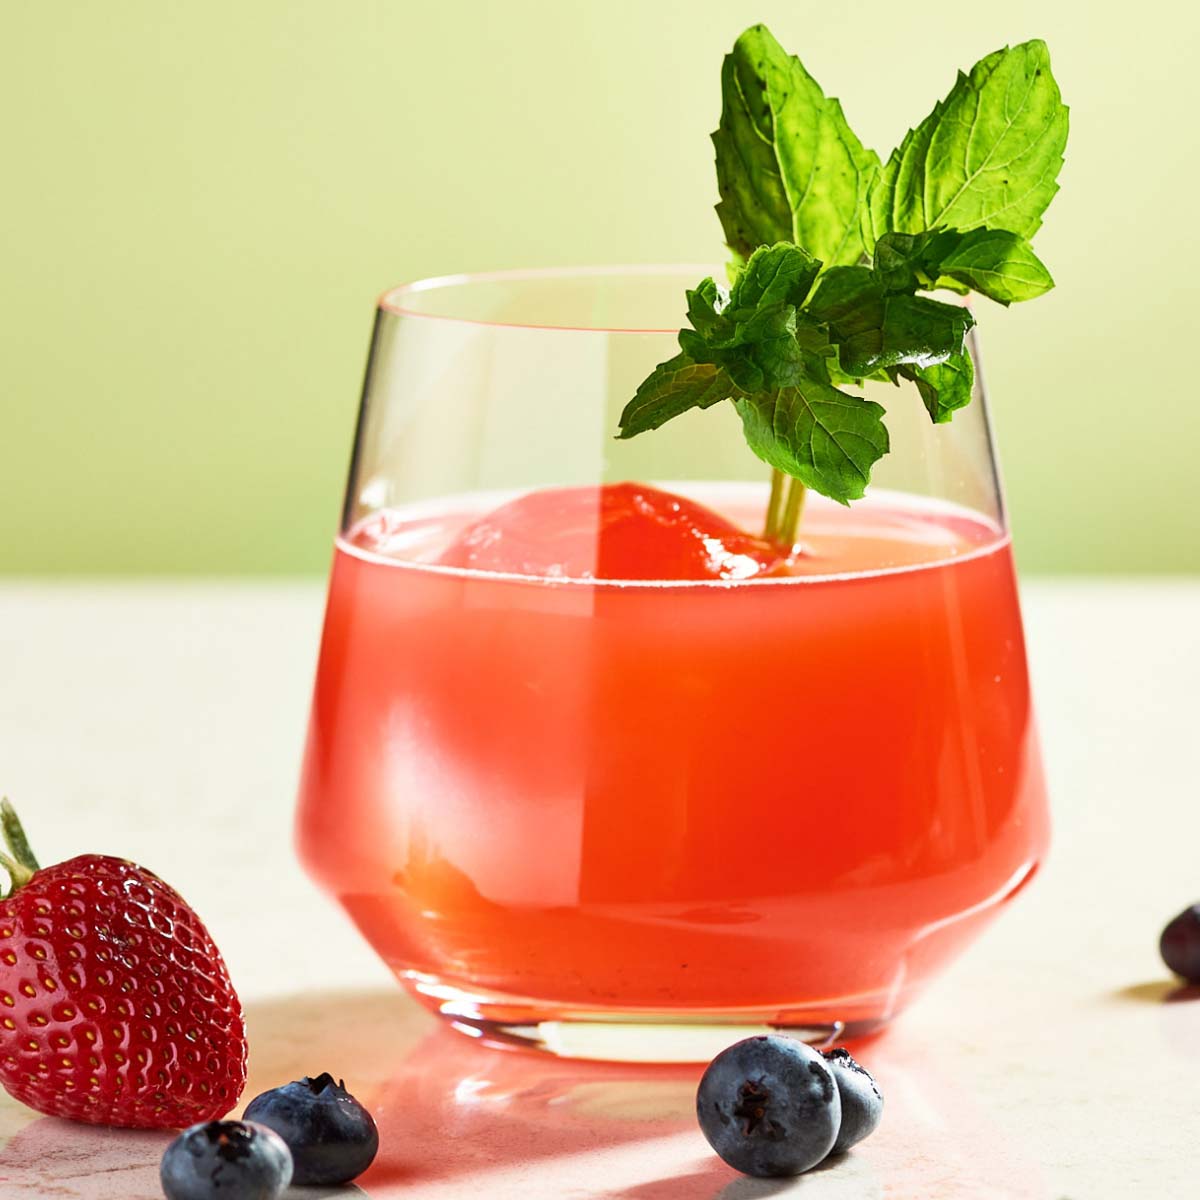 smoke-and-berries-drink